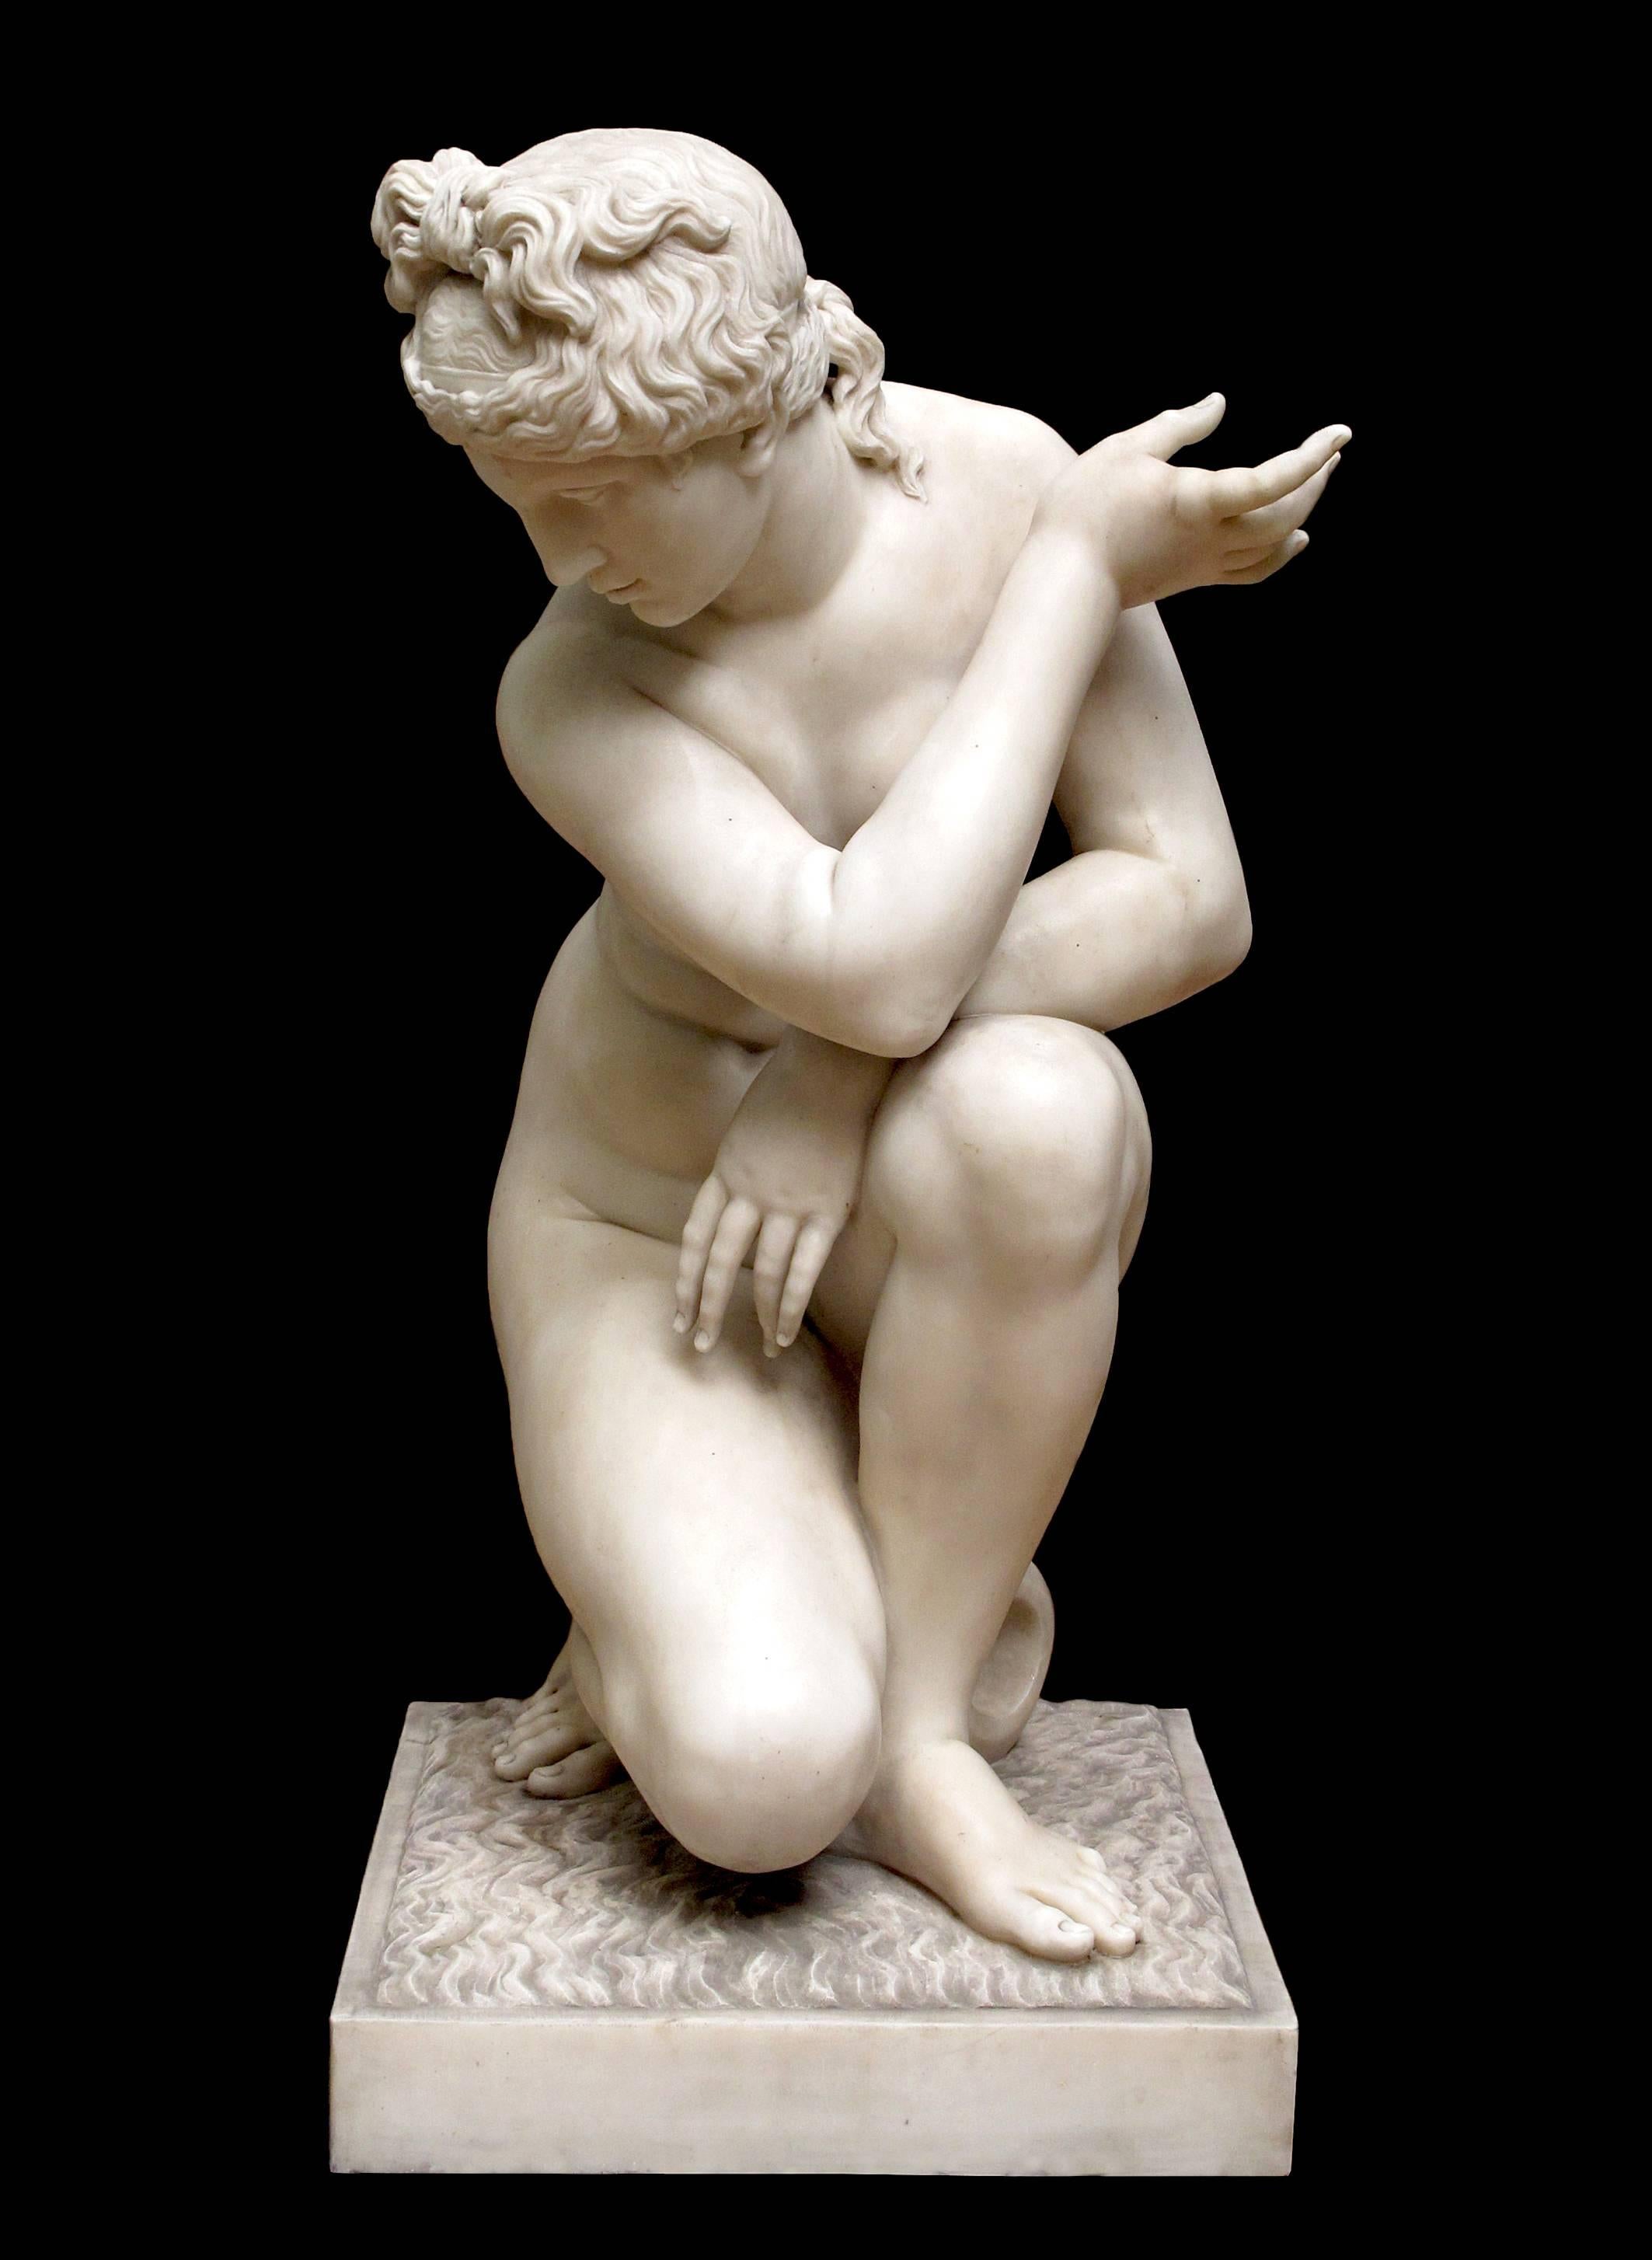 This imposing carved white marble figure of the crouching Venus, after the antique, Italy, early 19th century, was given by the City of Florence to Auguste Frédéric Louis Viesse de Marmont (20 July 1774 – 22 March 1852), famous French general and